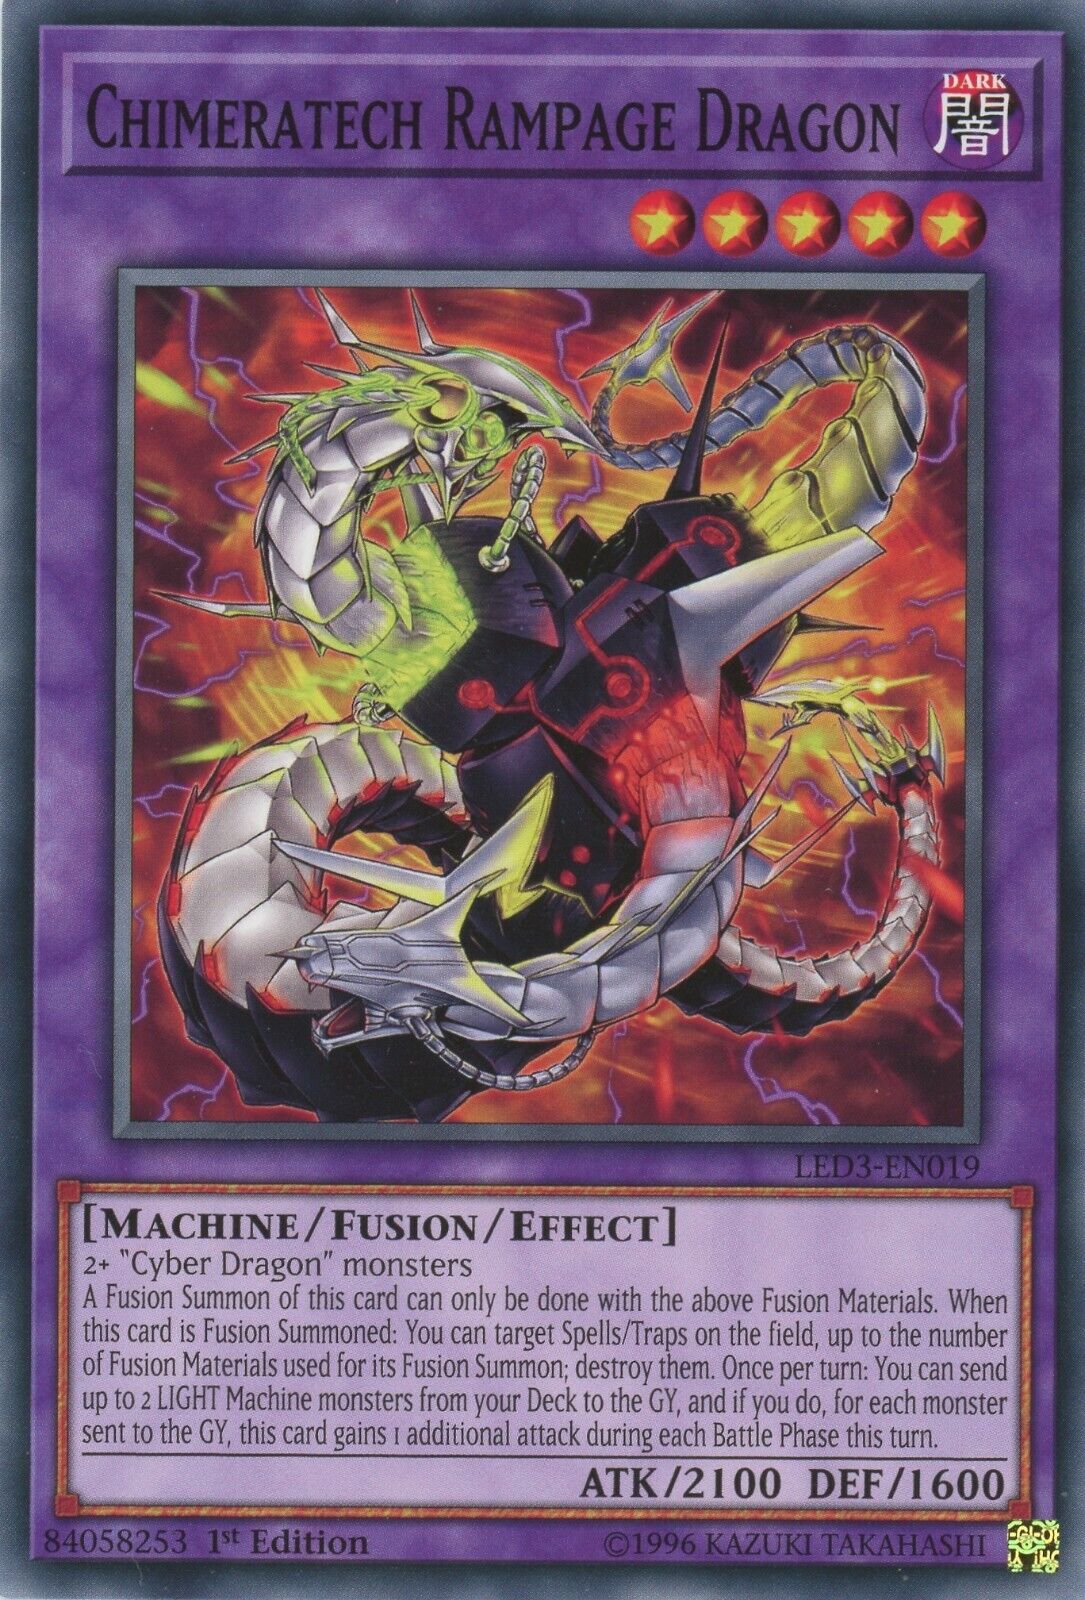 Yugioh Chimeratech Rampage Dragon LED3-EN019 Common Mint Condition 